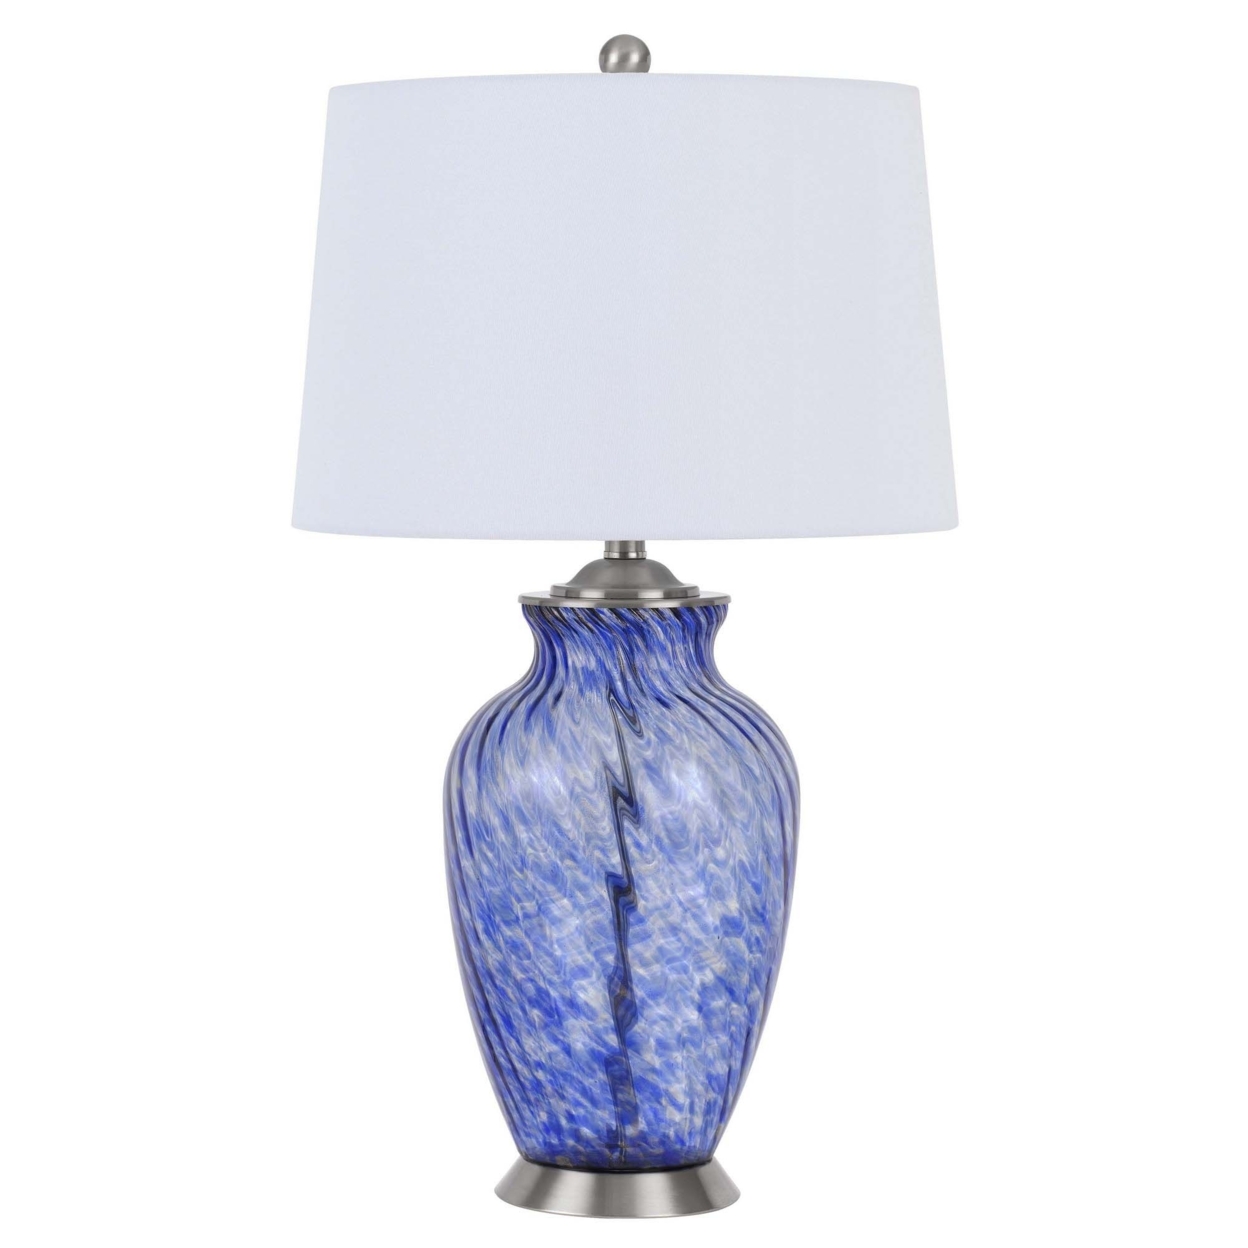 Table Lamp With Drum Shade And Glass Jar Base, White And Blue- Saltoro Sherpi